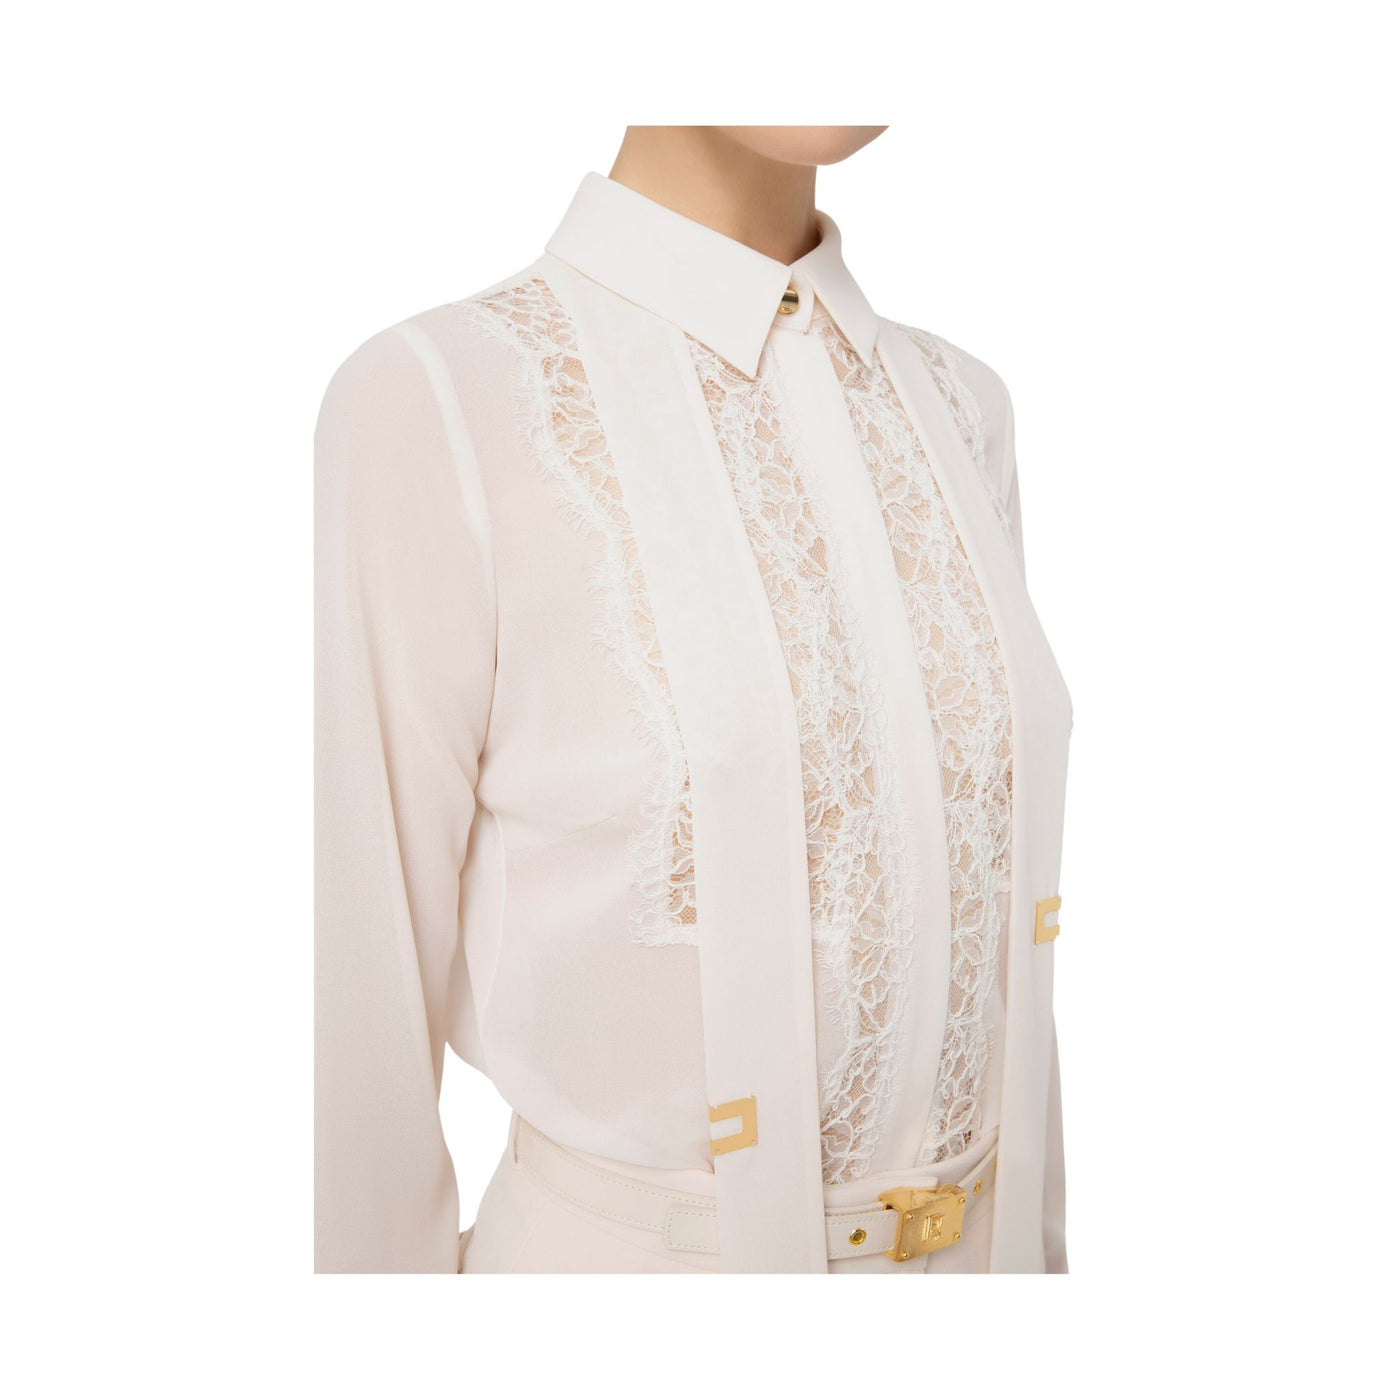 Women's shirt with lace inserts